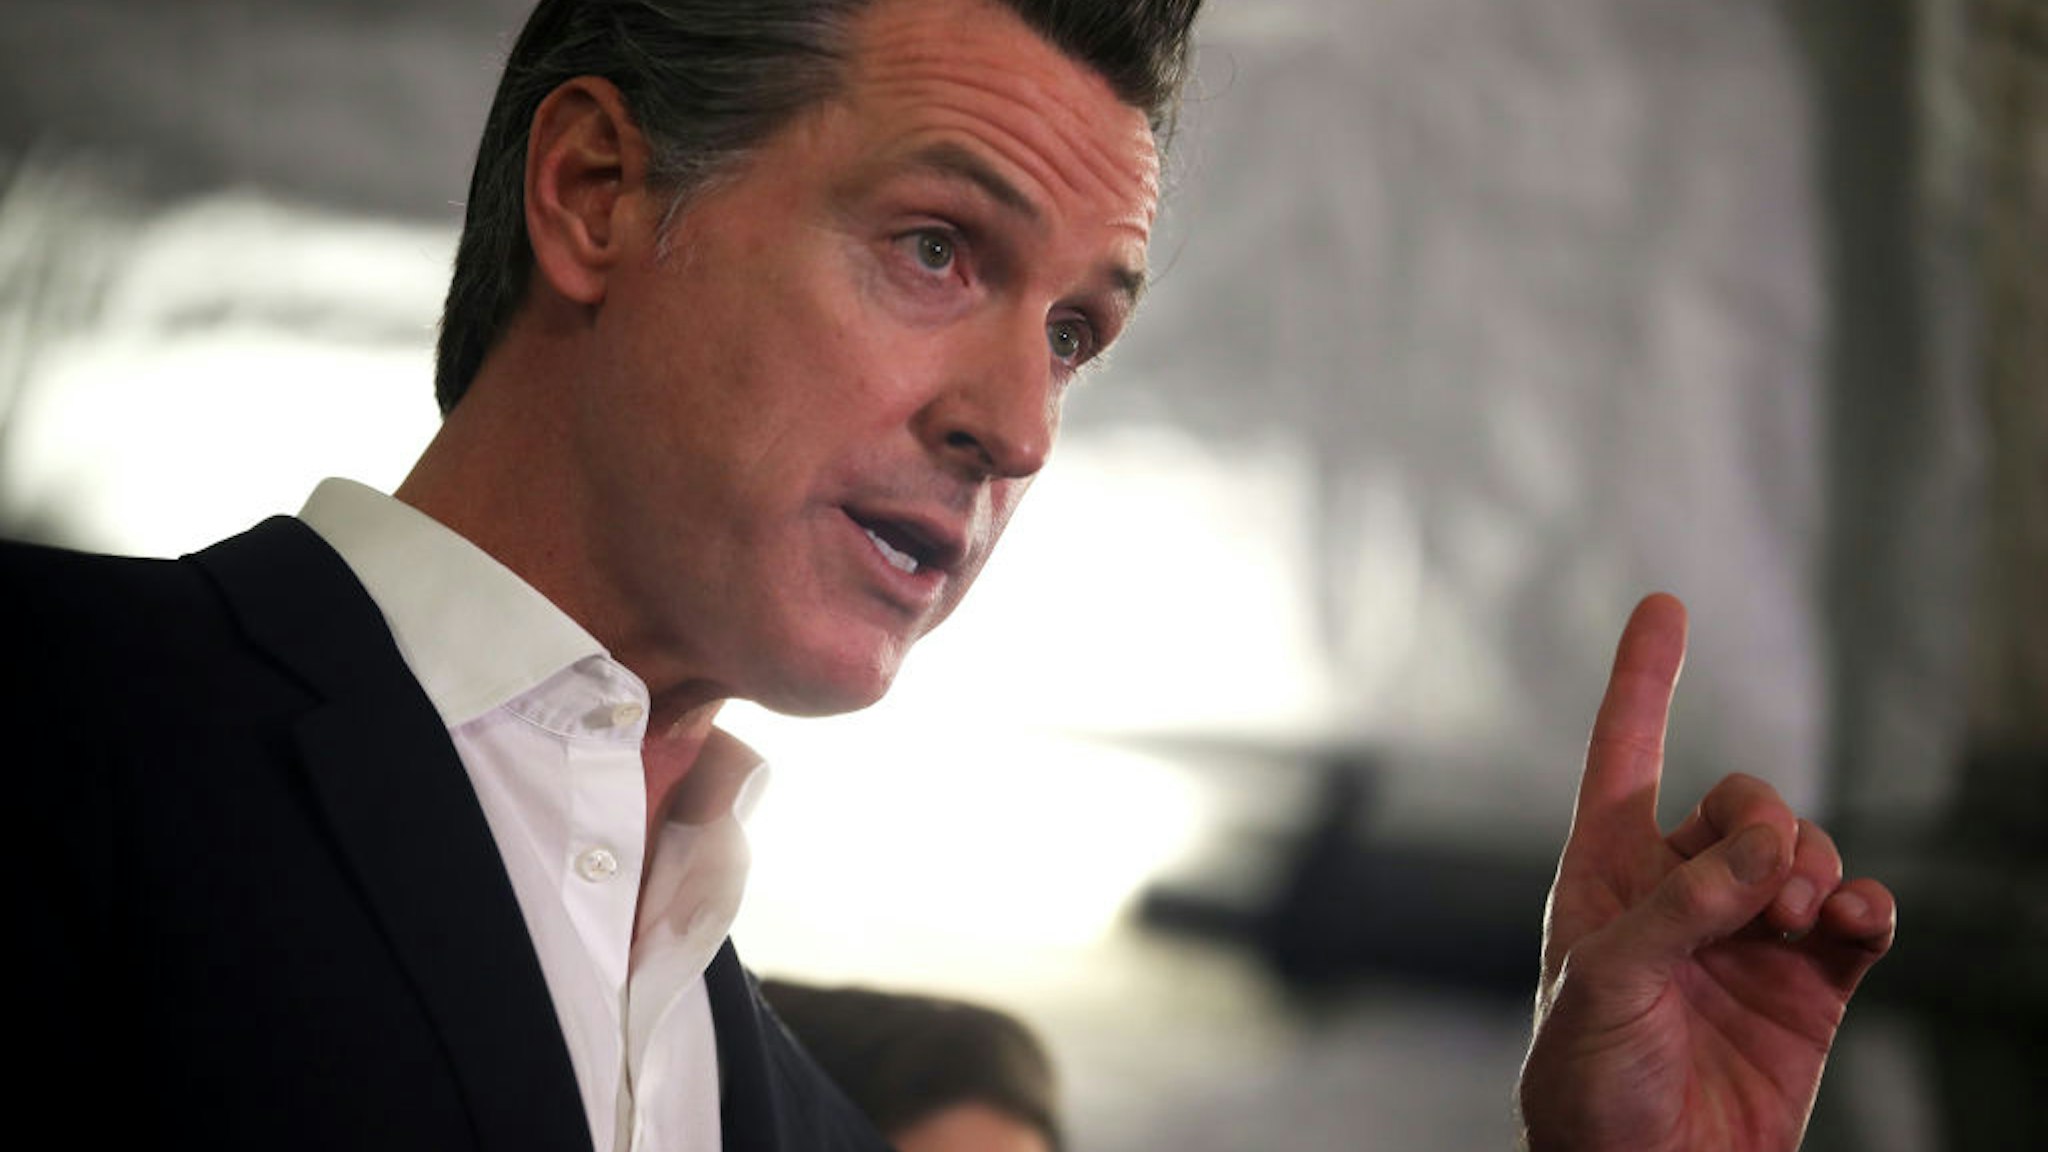 OAKLAND, CALIFORNIA - JANUARY 16: California Gov. Gavin Newsom speaks during a a news conference about the state's efforts on the homelessness crisis on January 16, 2020 in Oakland, California. Newsom was joined by Oakland Mayor Libby Schaaf to announce that Oakland will receive 15 unused FEMA trailers for the city to use as temporary housing and as mobile health and social services clinics for the homeless. Newsom signed on executive order on January 8 to deploy 100 trailers and crisis response teams to areas in need across the state.